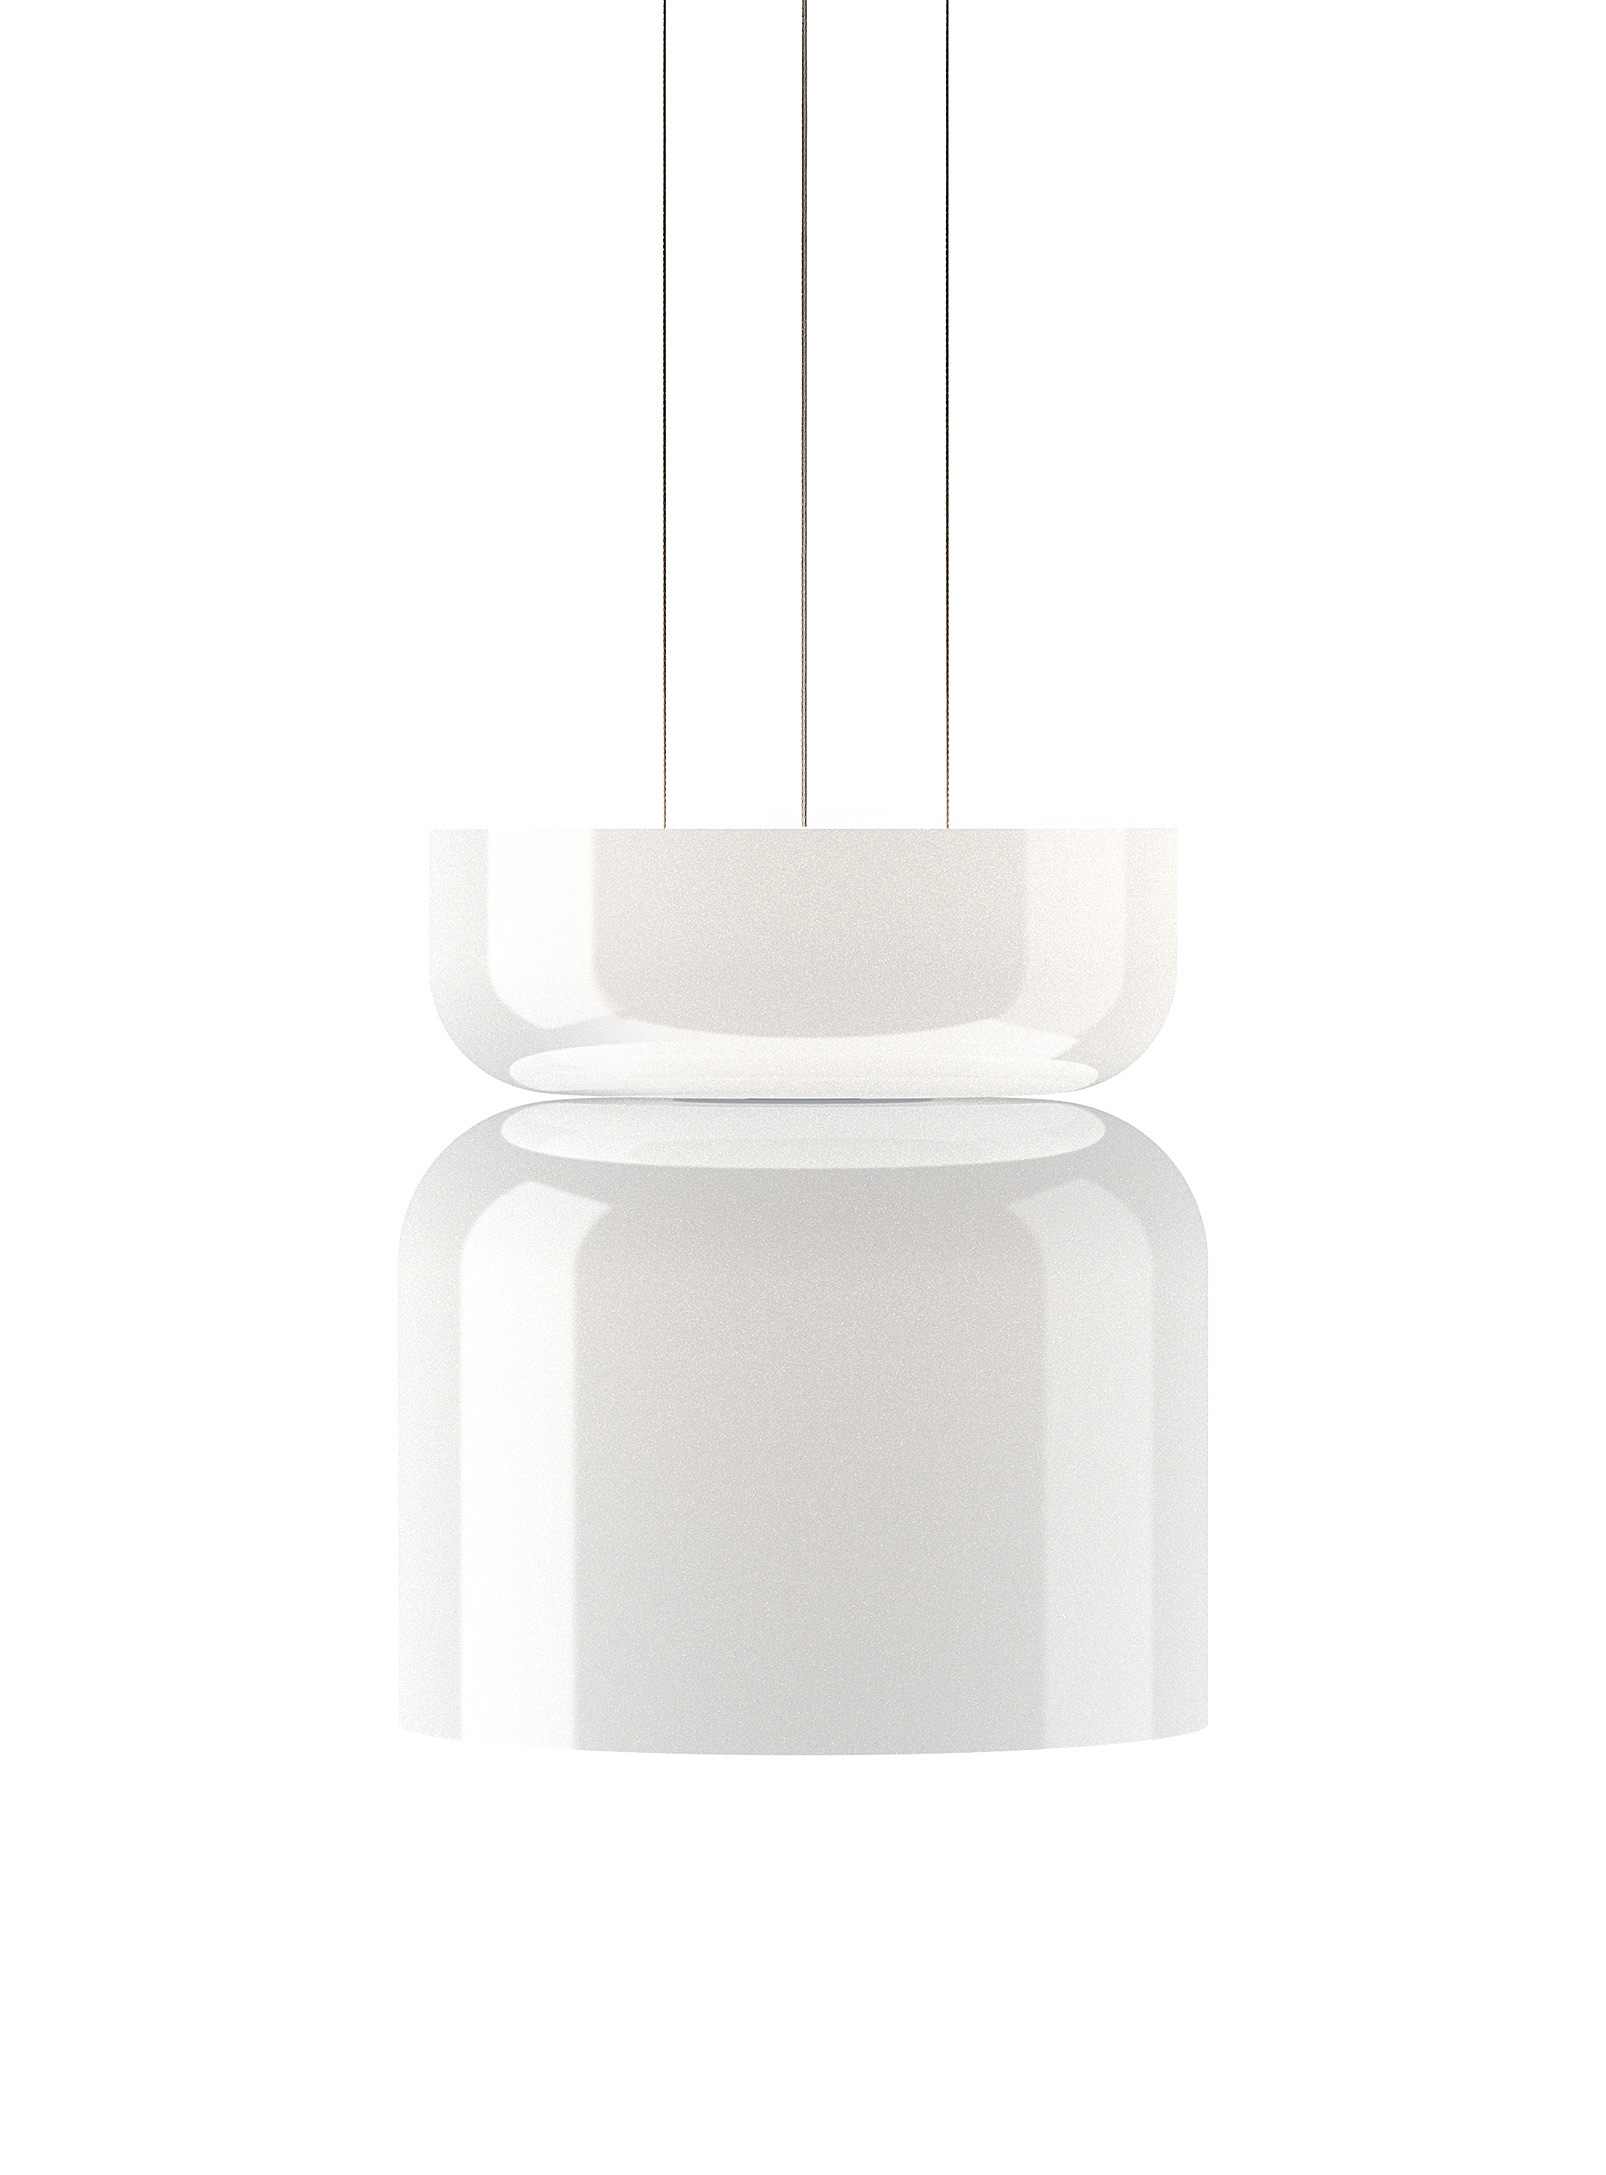 Pablo Designs Totem Classic Hanging Lamp See Available Sizes In White